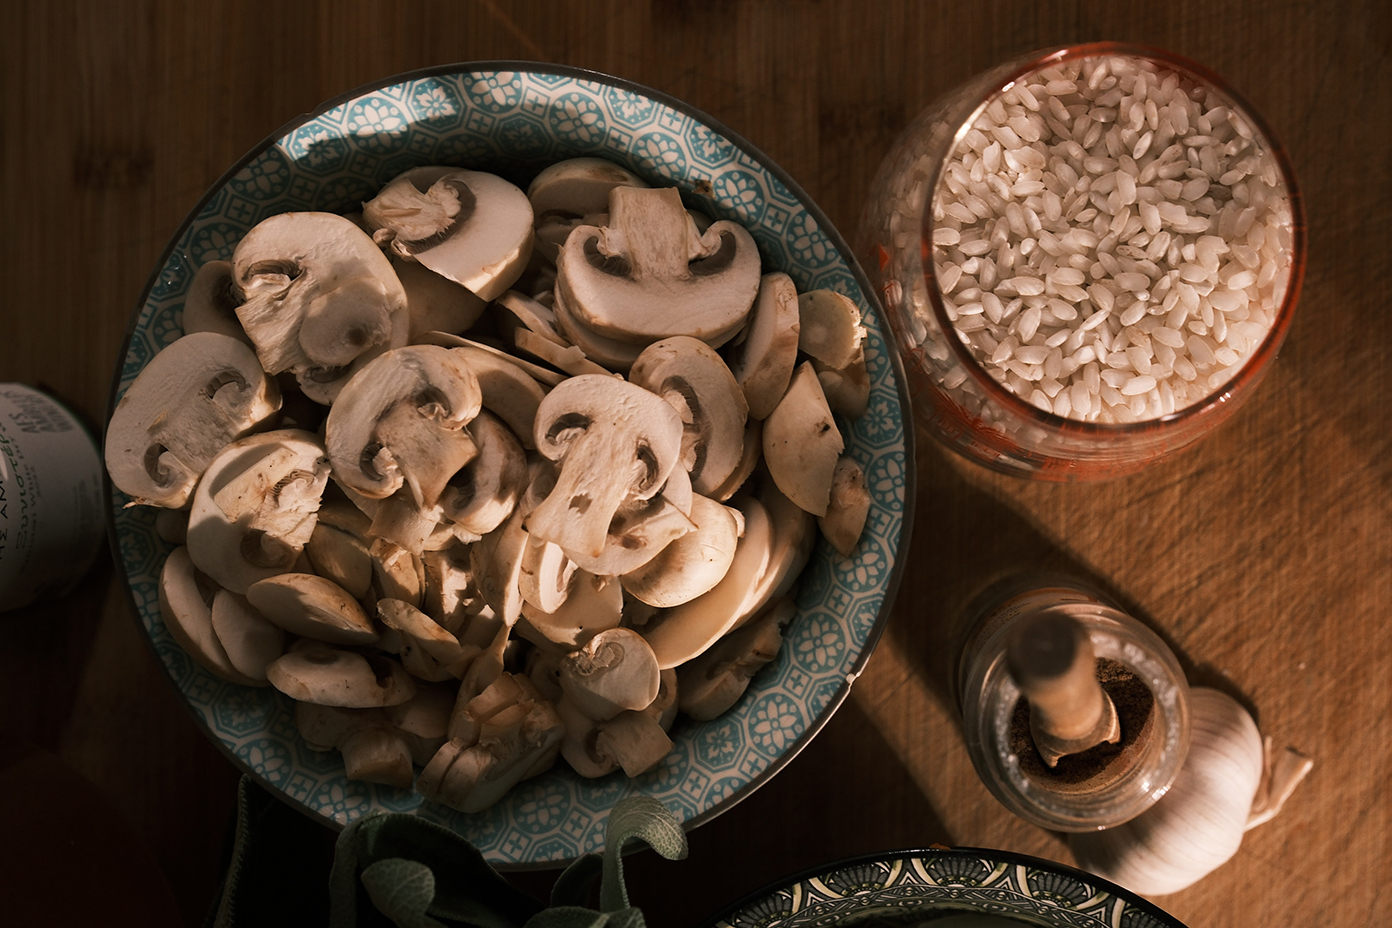 Close-up of a cooking preparation scene showing a detailed view of sliced white mushrooms in a blue patterned ceramic bowl, the glass jar of arborio rice, the jar of ground nutmeg, and the head of garlic, all on a wooden surface bathed in warm light.